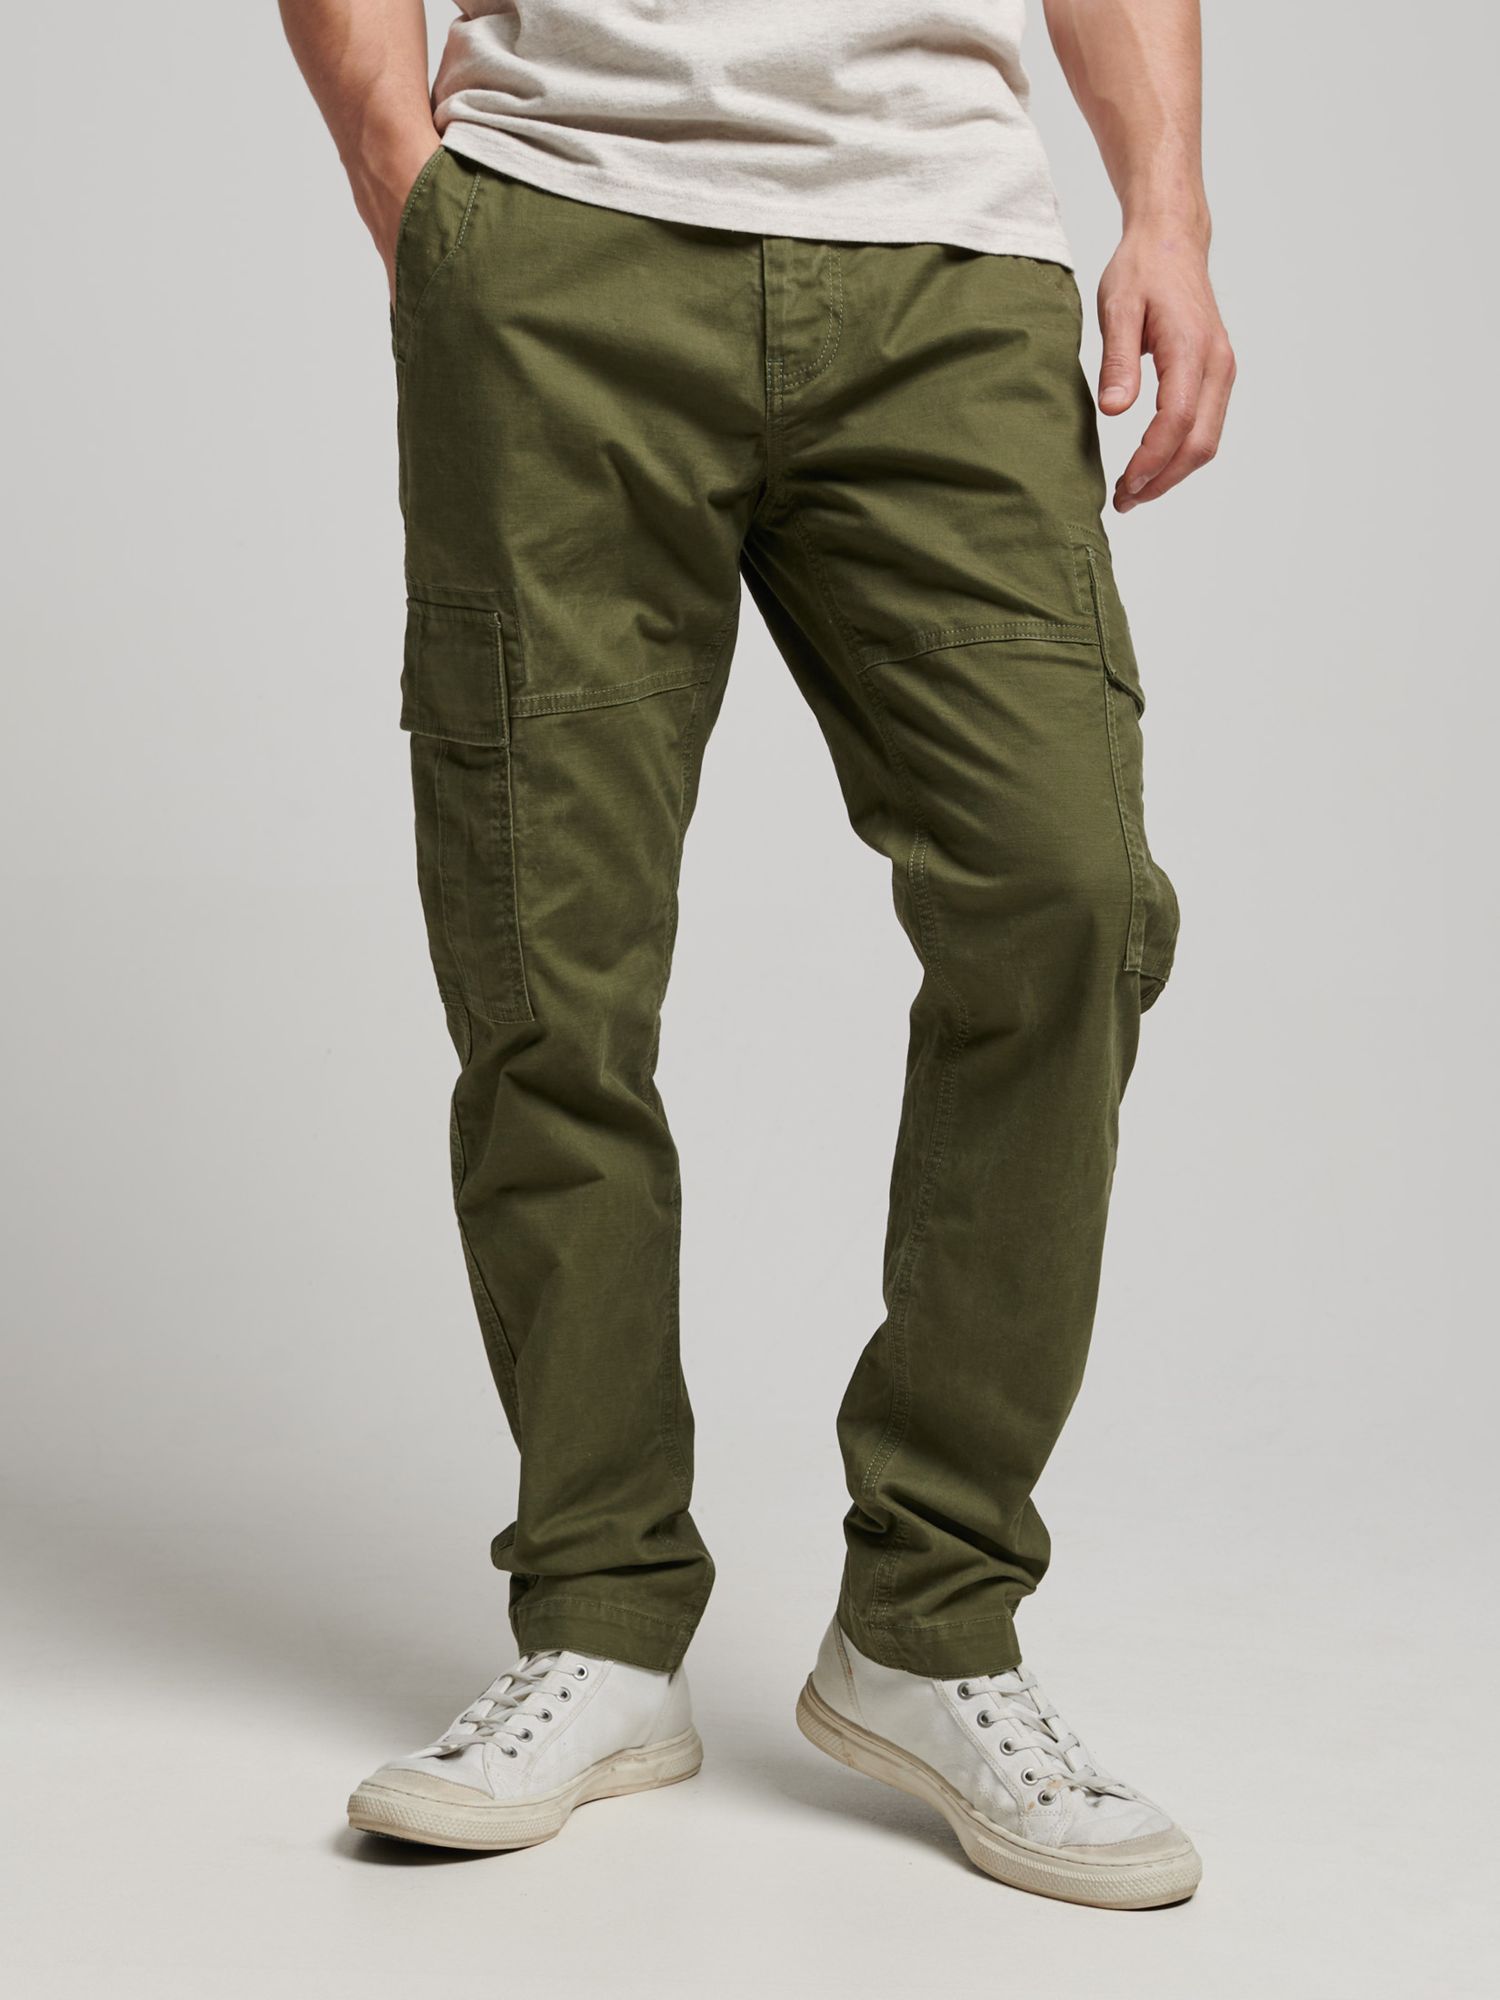 Superdry Organic Cotton Core Cargo Trousers at John Lewis & Partners